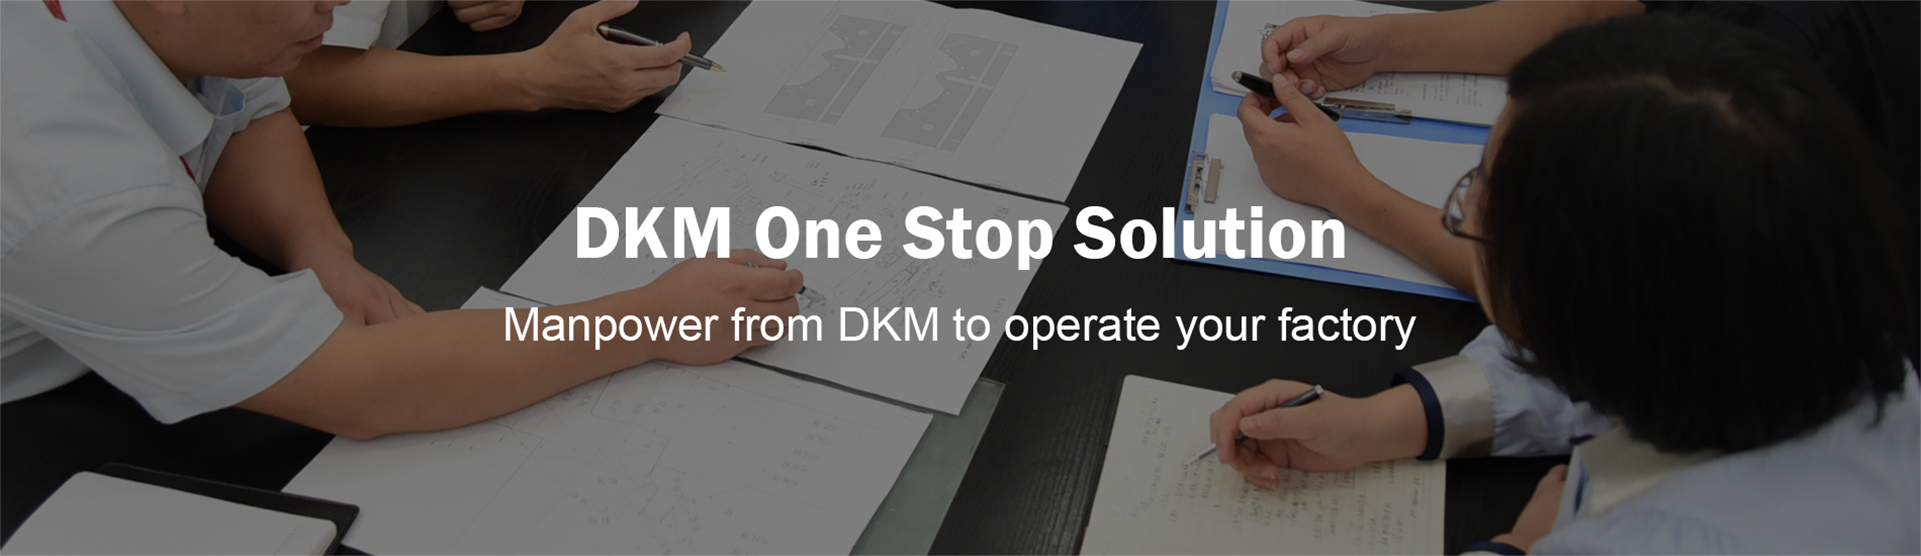 DKM One stop solution